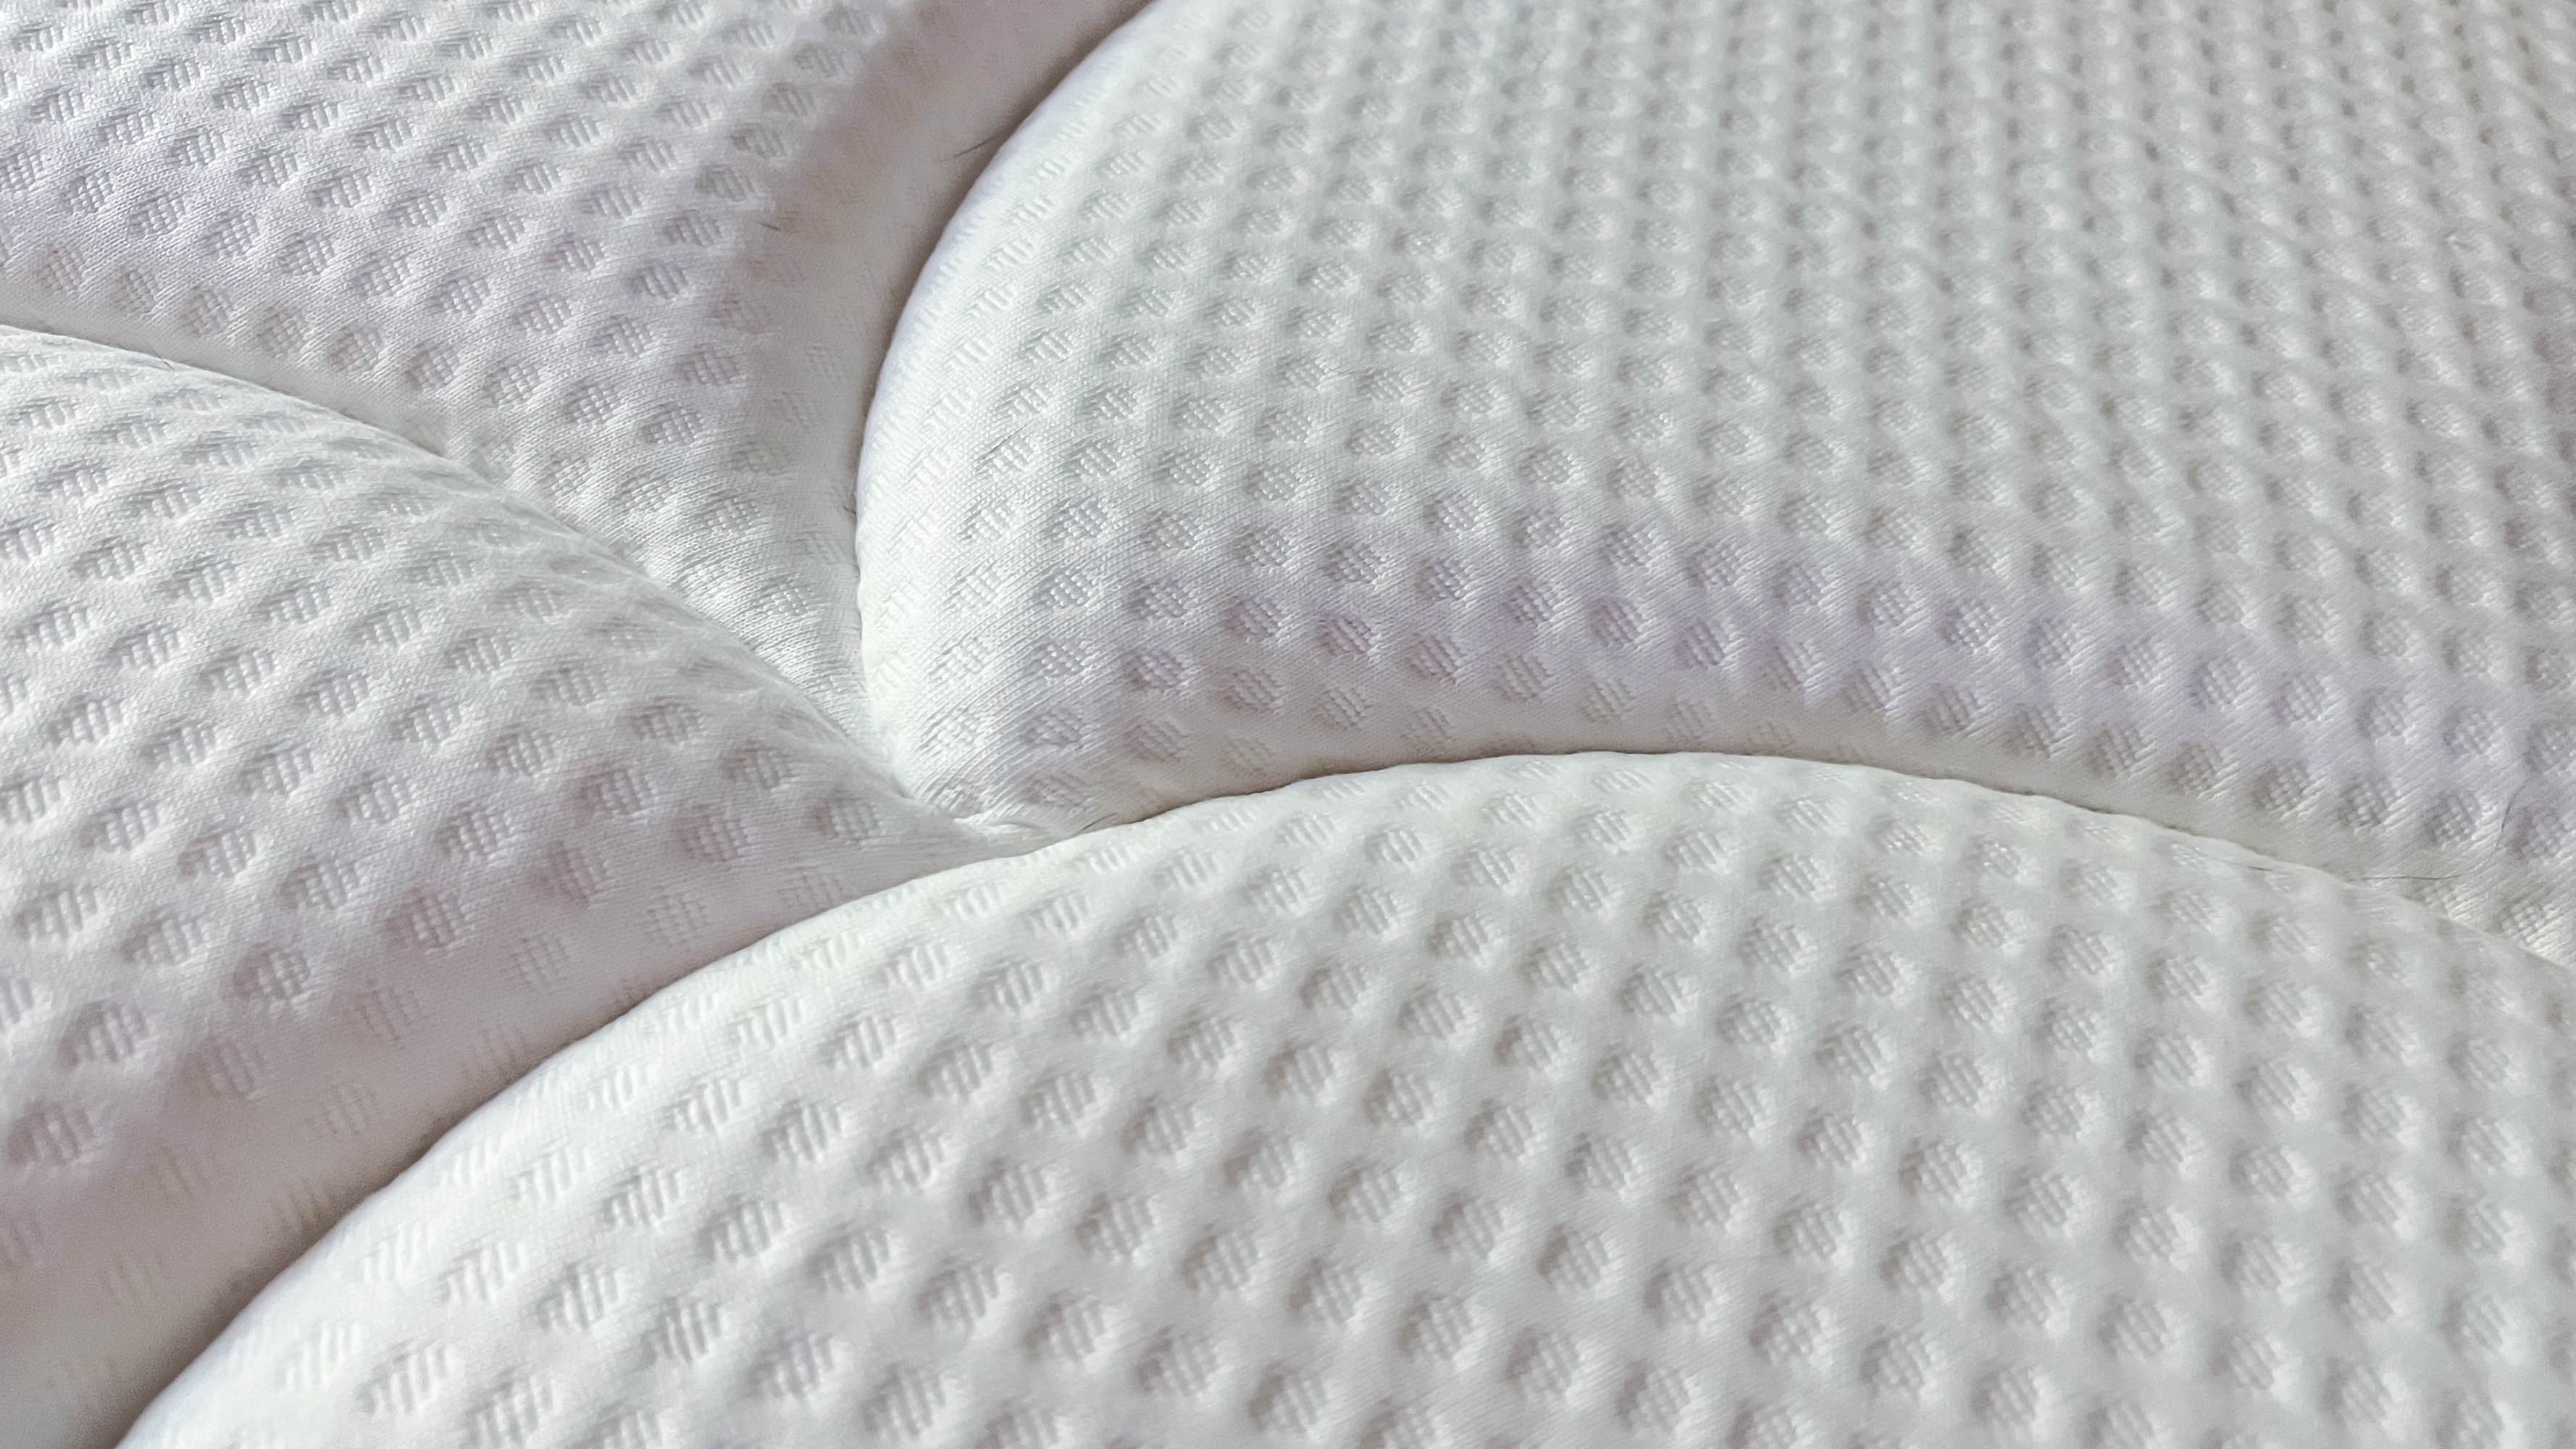 Image shows a close up of our review sample of the DreamCloud Premier Hybrid mattress and the plush euro top